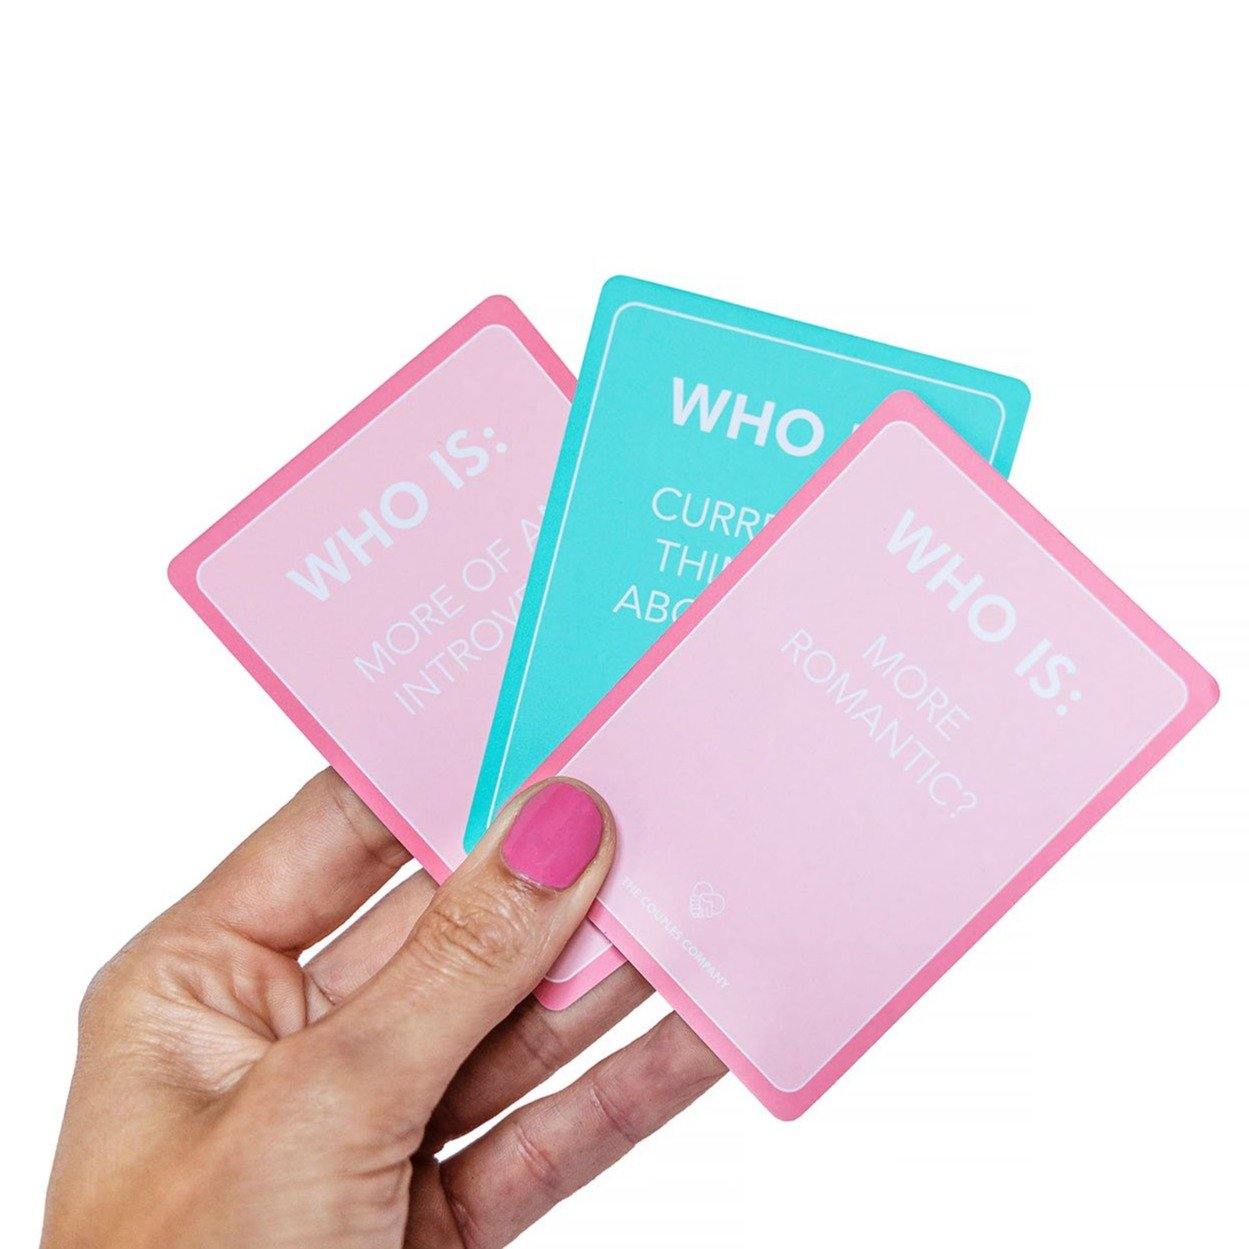 Buy Who Is? Card Game - The Couples Company